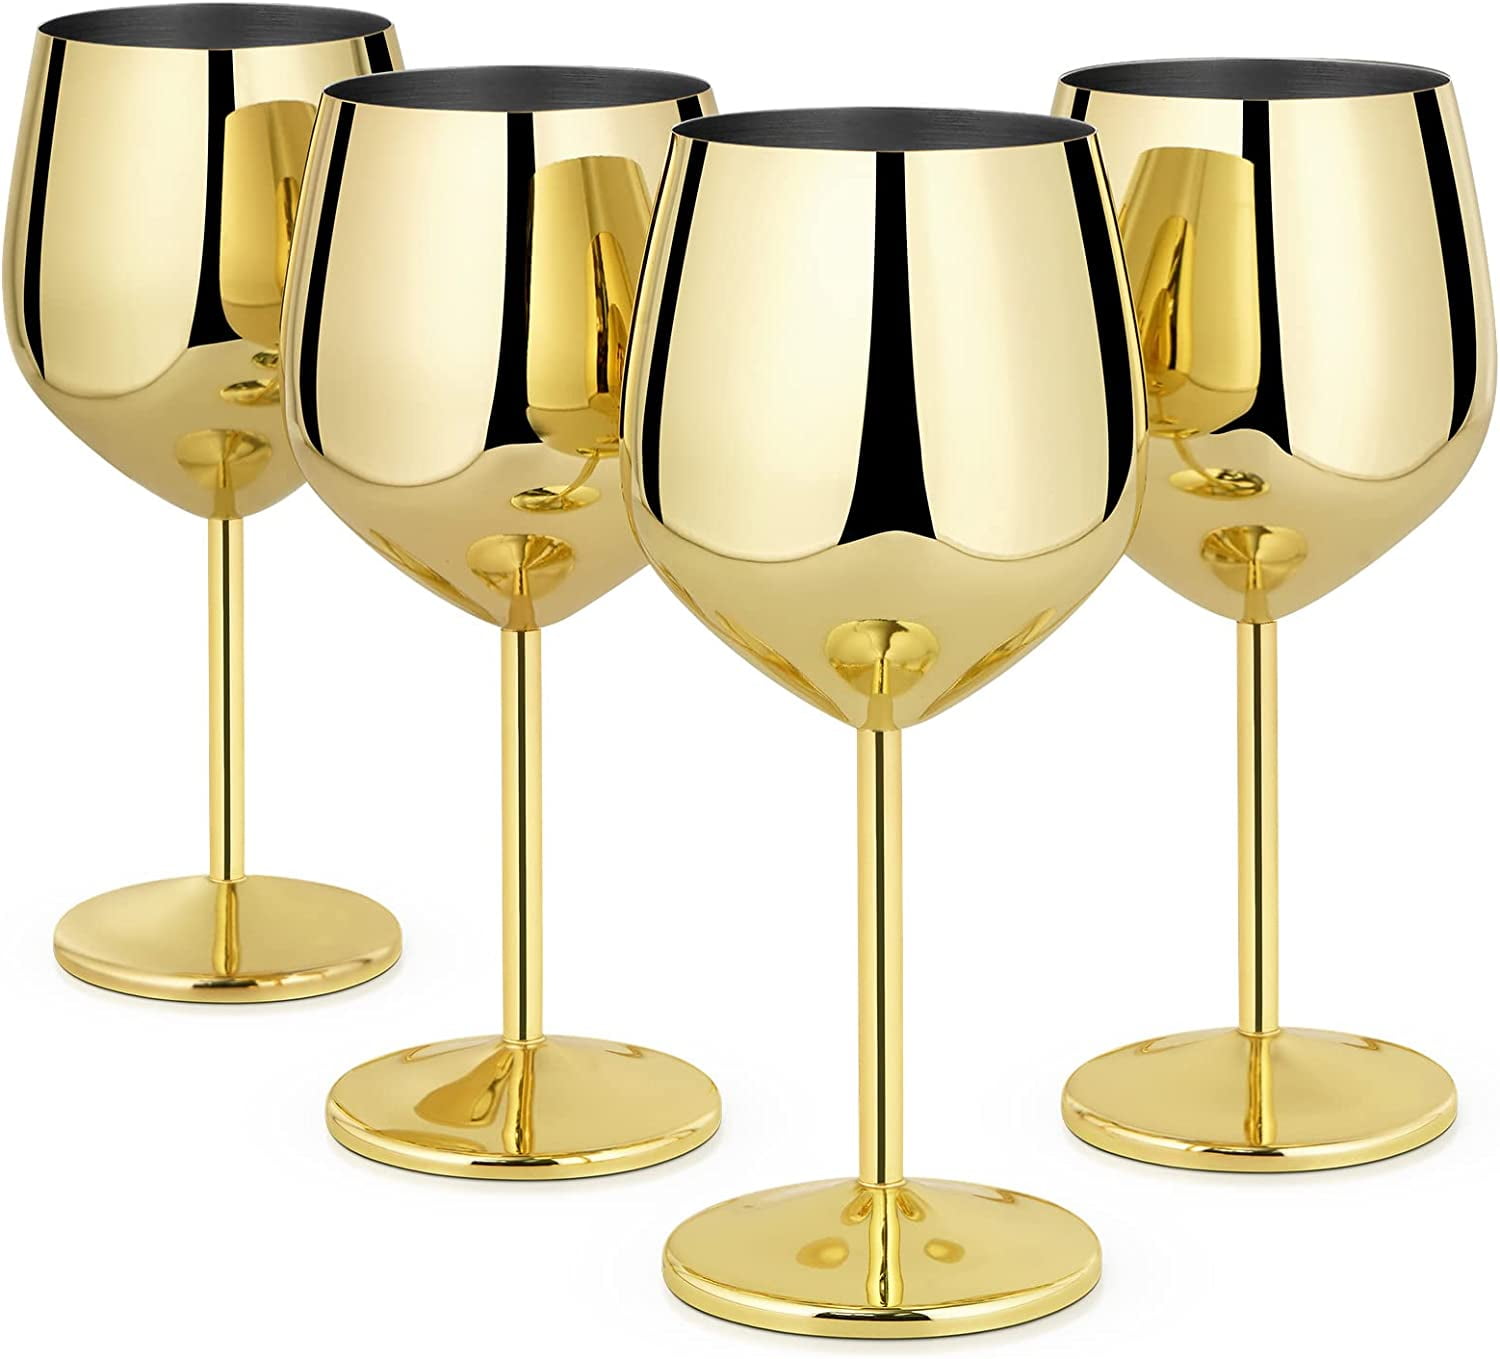 Europe high-end Crystal glass wine glass Big round tripe goblet 700ml  champagne glasses wedding birthday Gifts party drinkware